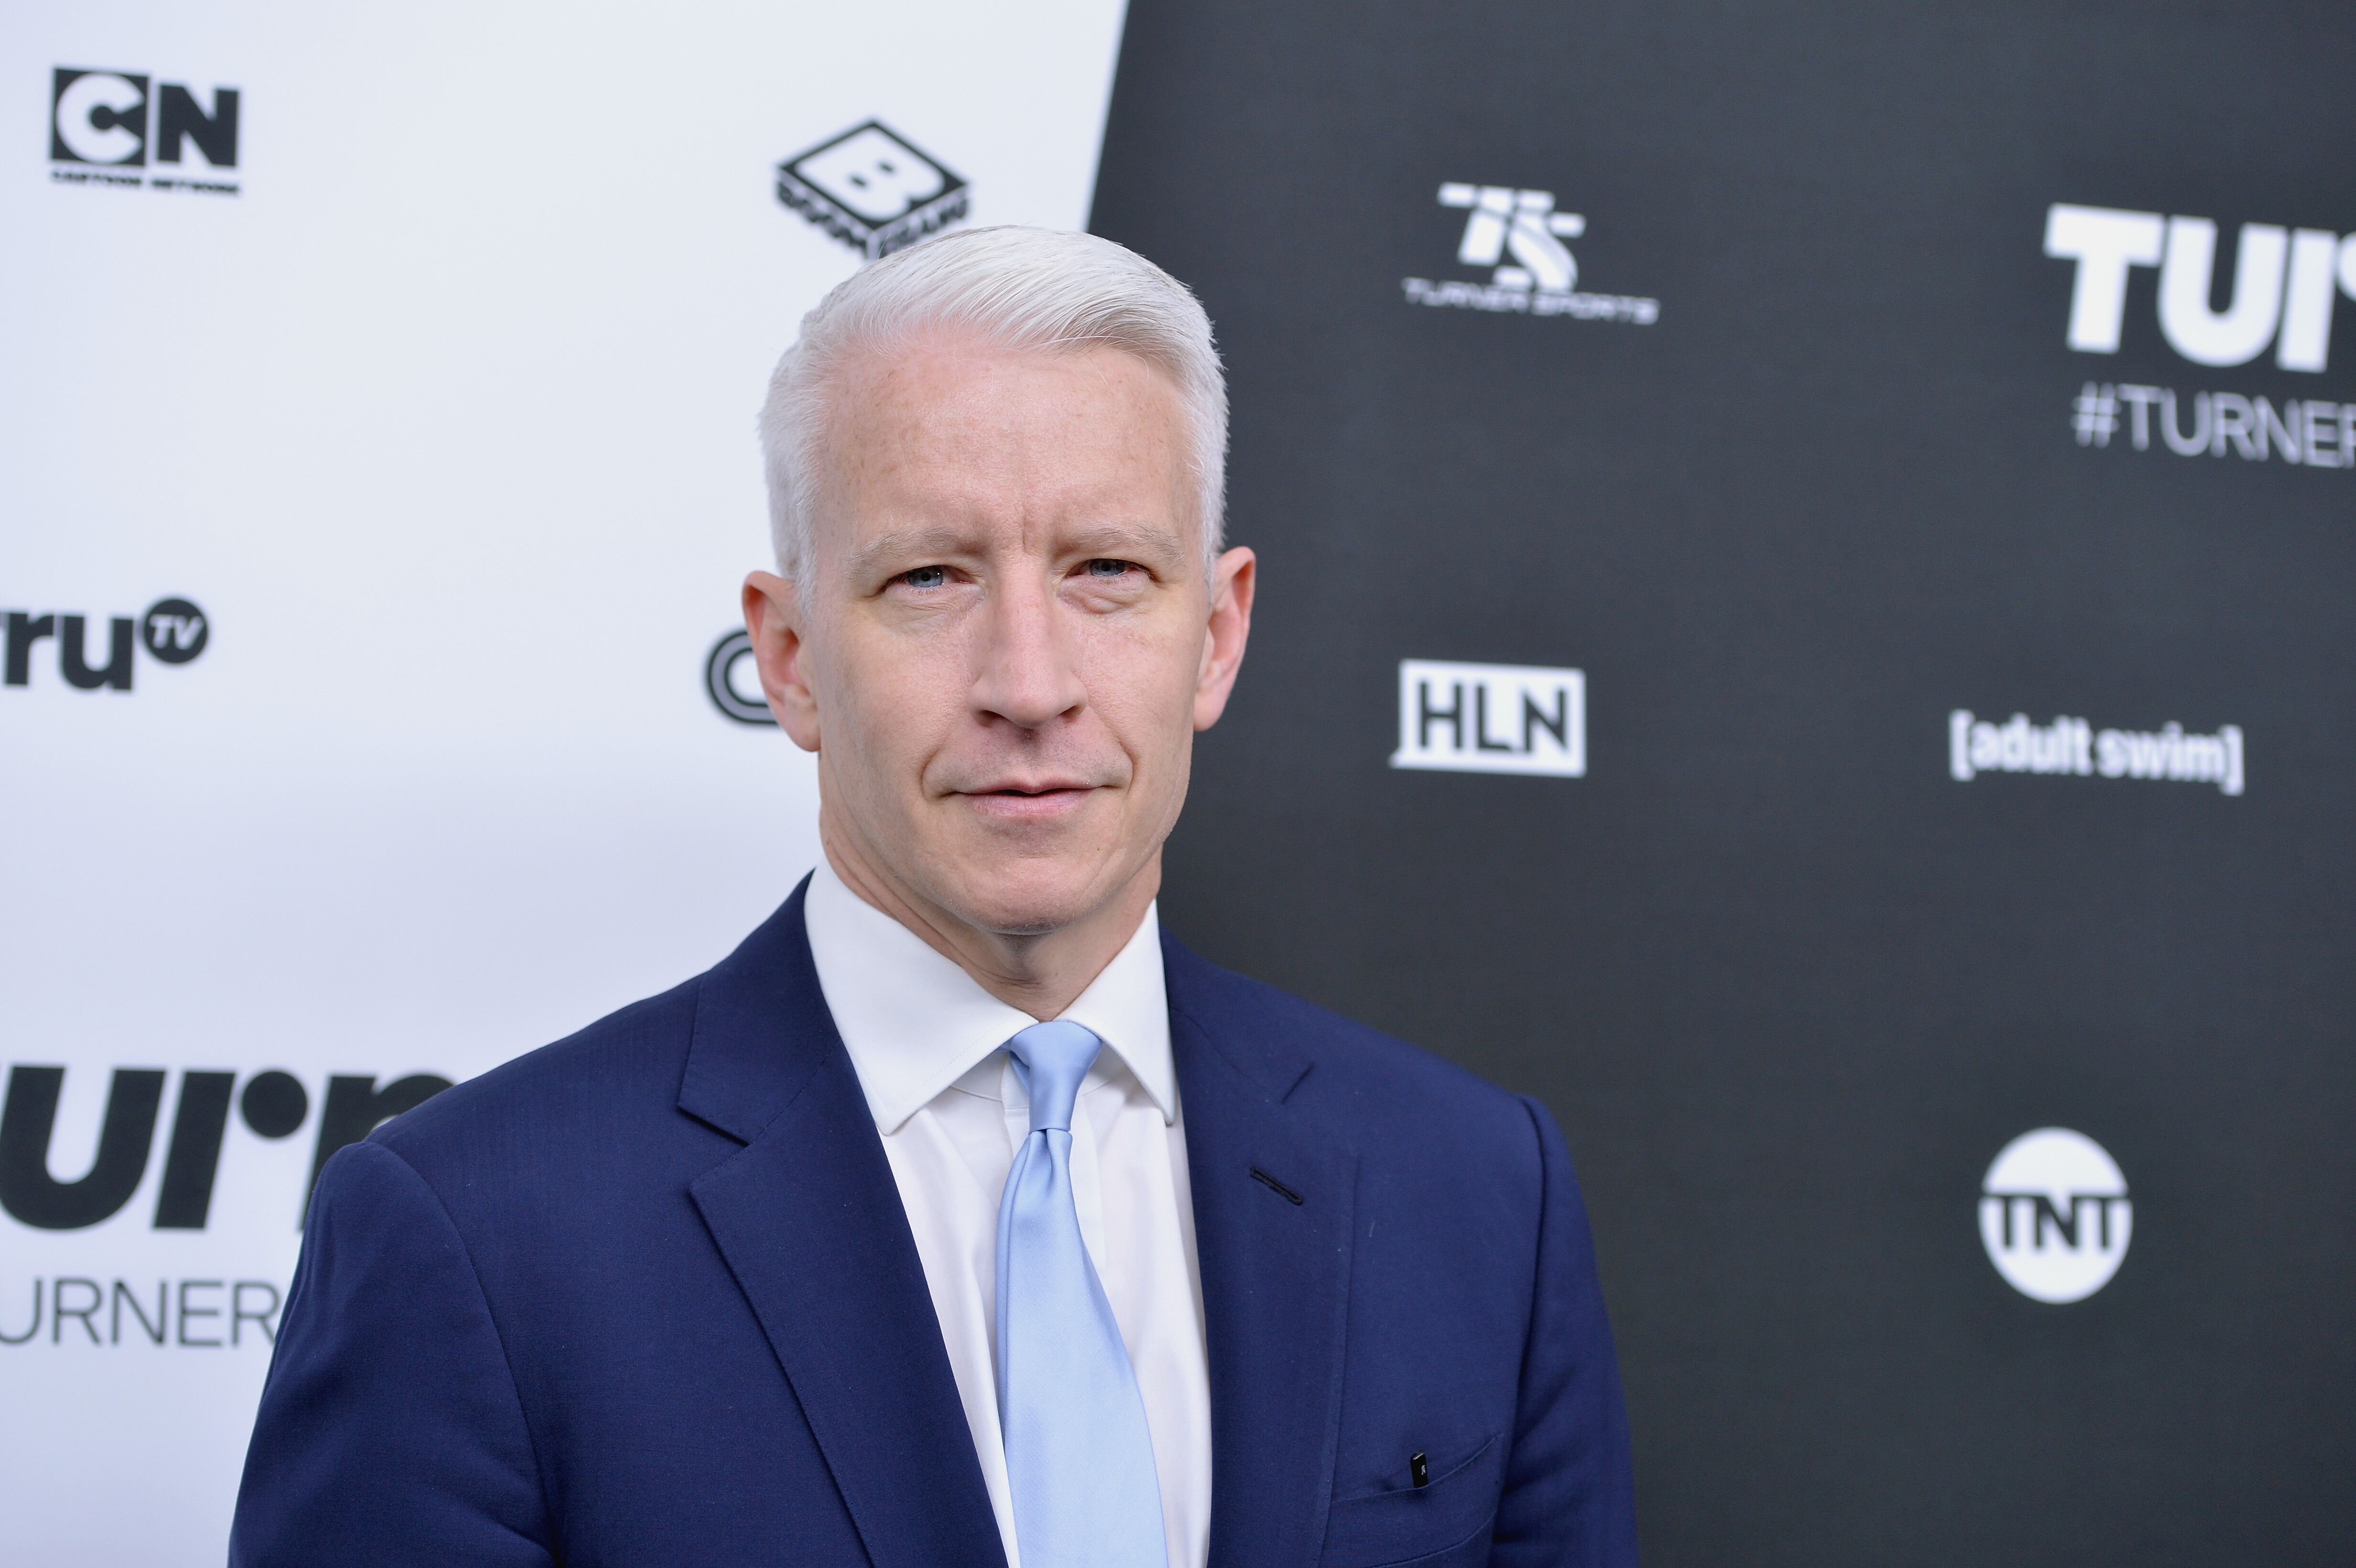 Anderson Cooper at the Turner Upfront held at Nick & Stef's Steakhouse on May 18, 2016, in New York City | Photo: Getty Images